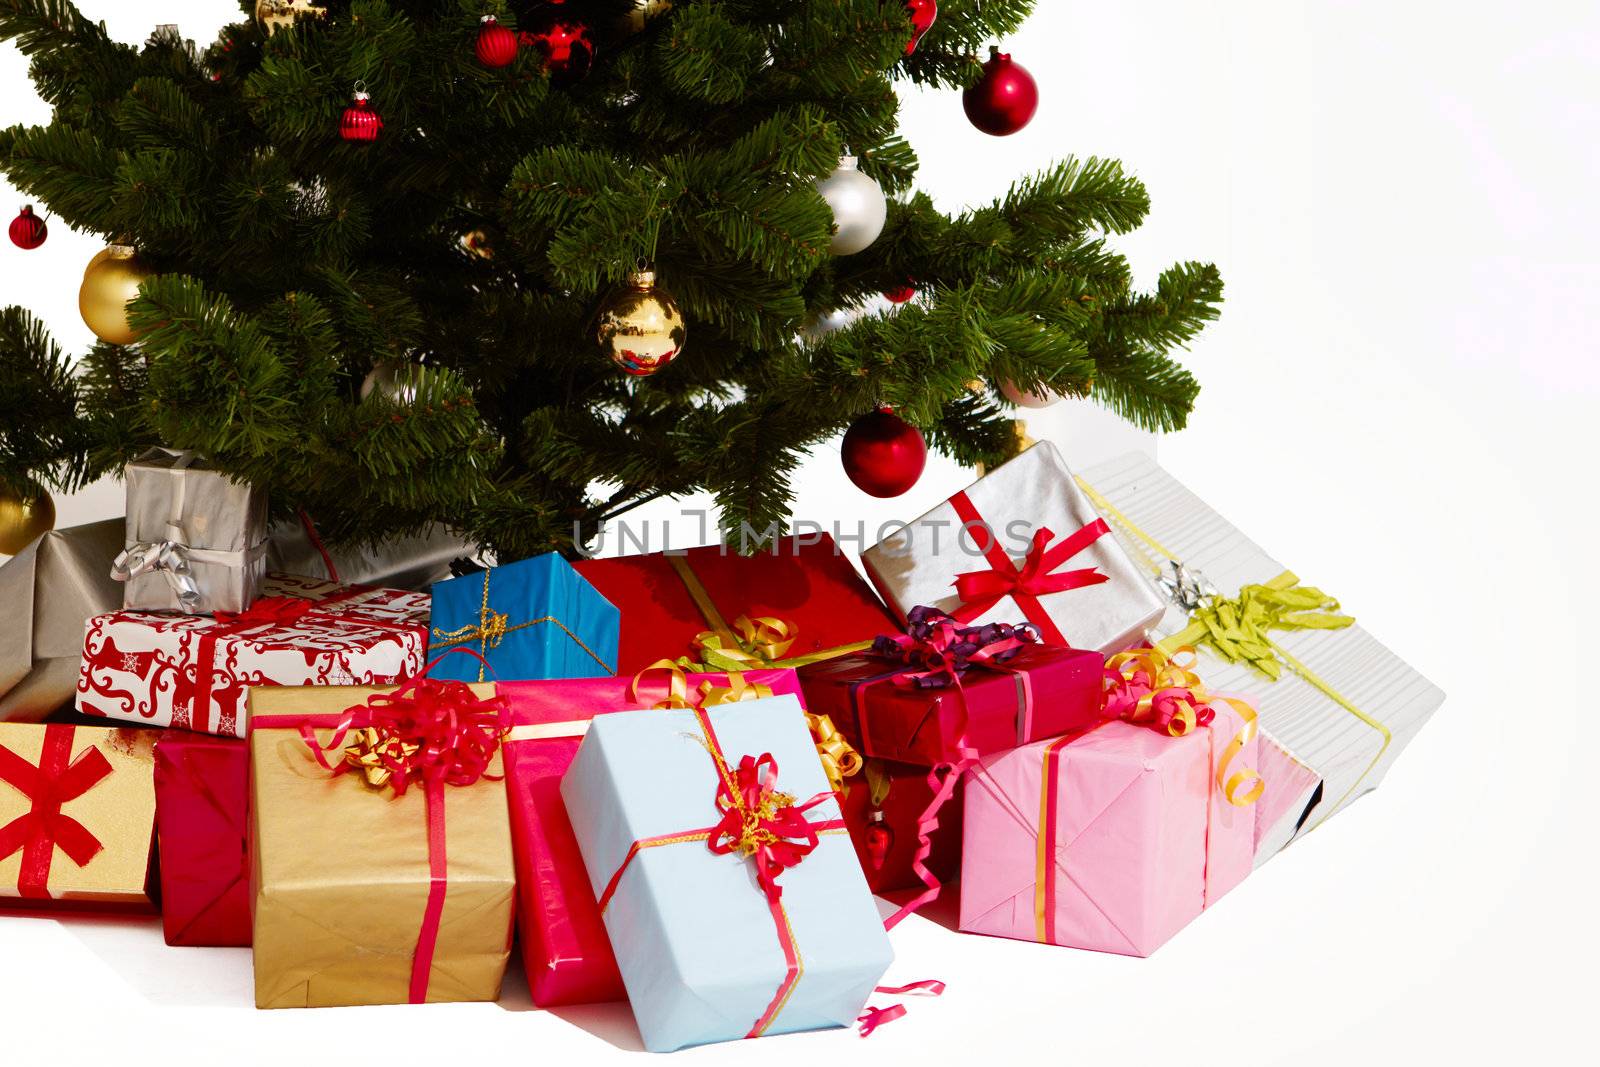 Christmas - Presents under a tree on white by FreedomImage